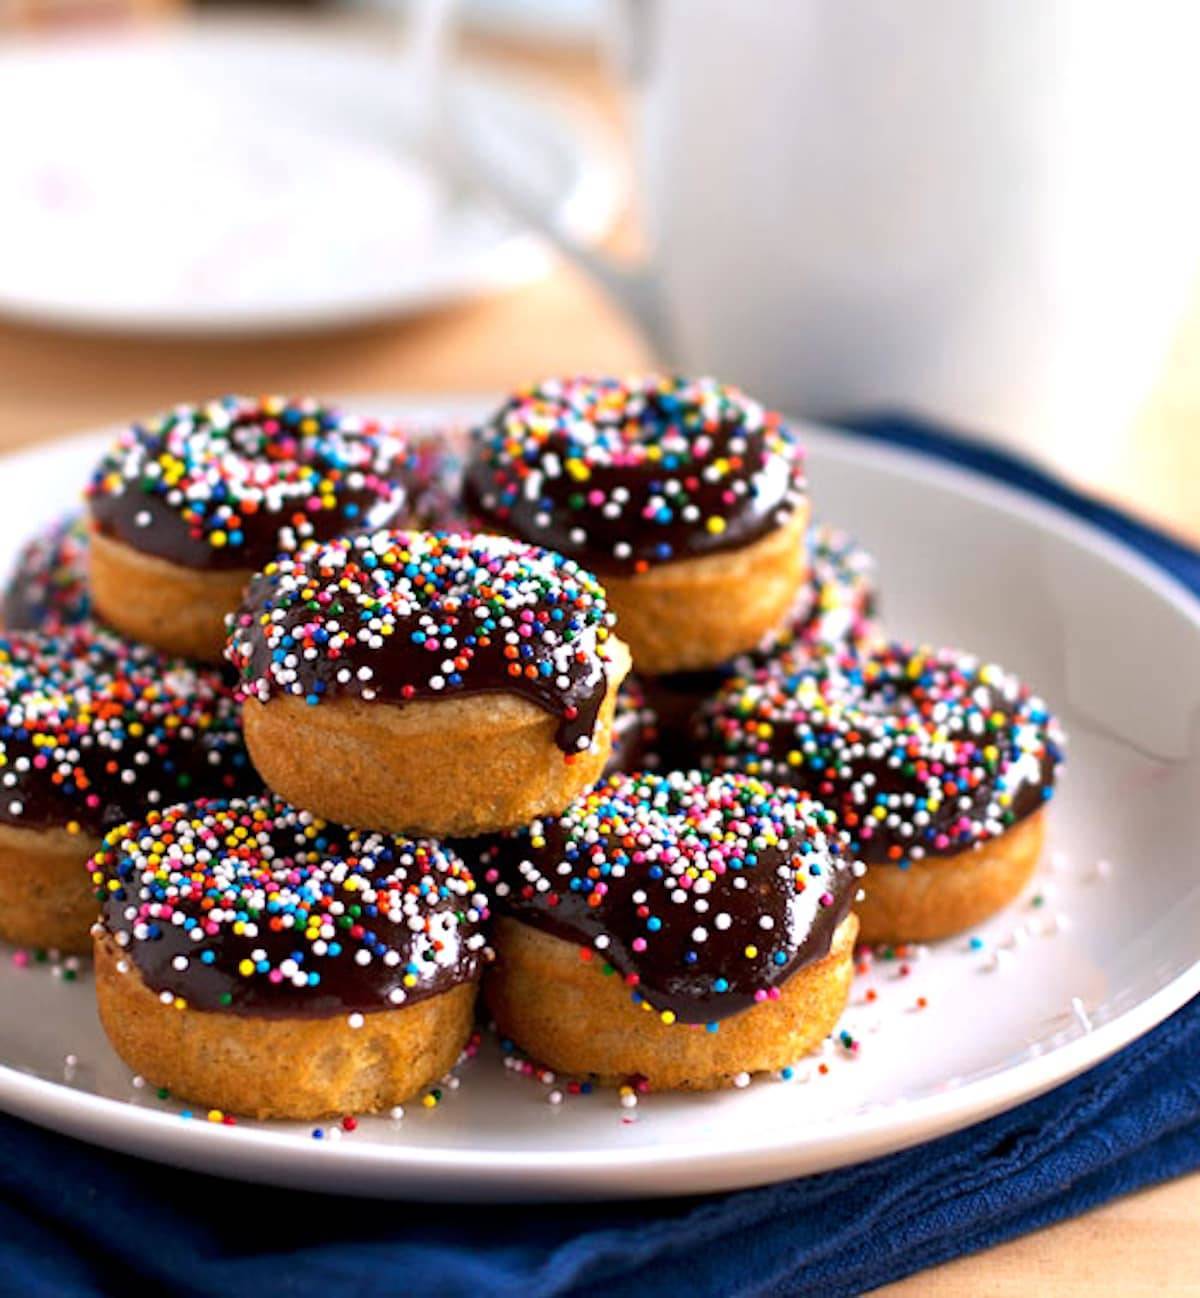 Chocolate glazed baked mini donuts with sprinkles on a plate.